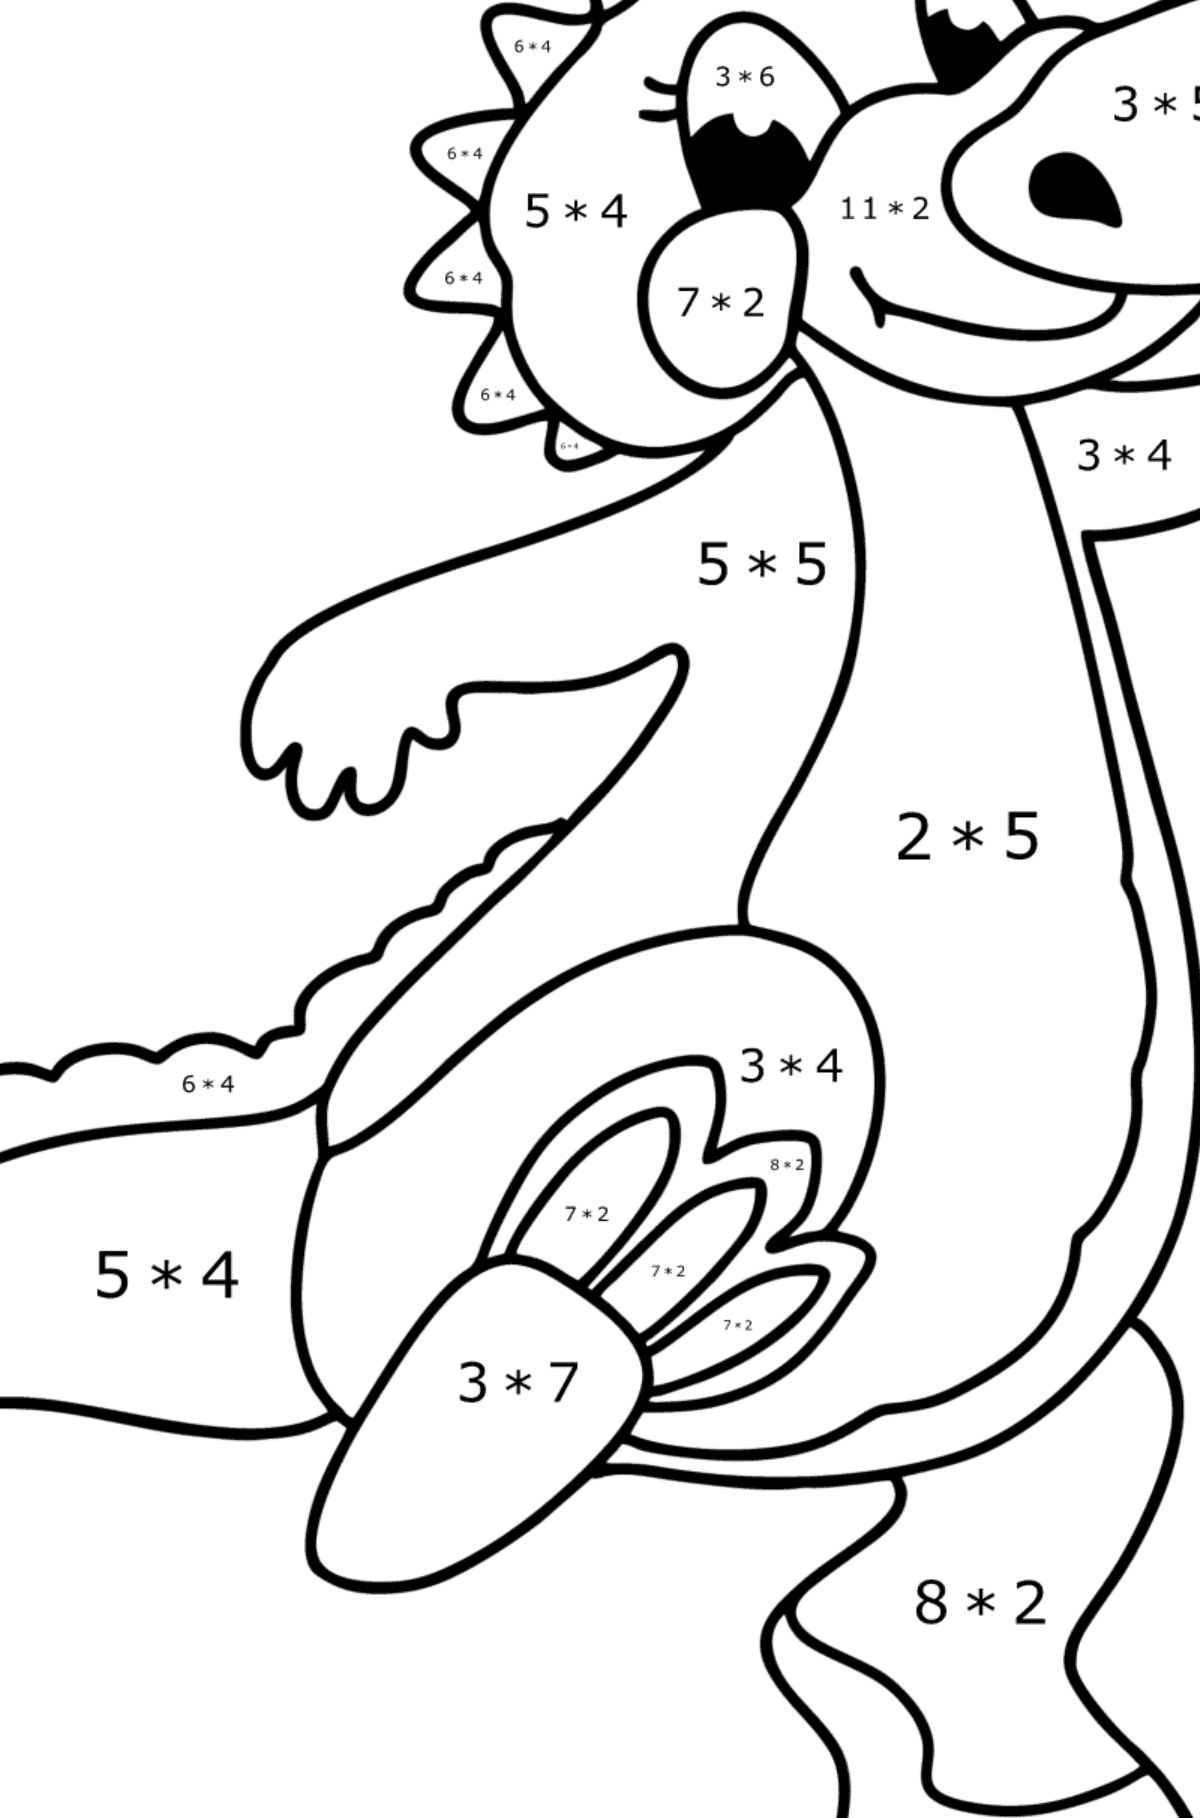 Happy dragon baby coloring page - Math Coloring - Multiplication for Kids